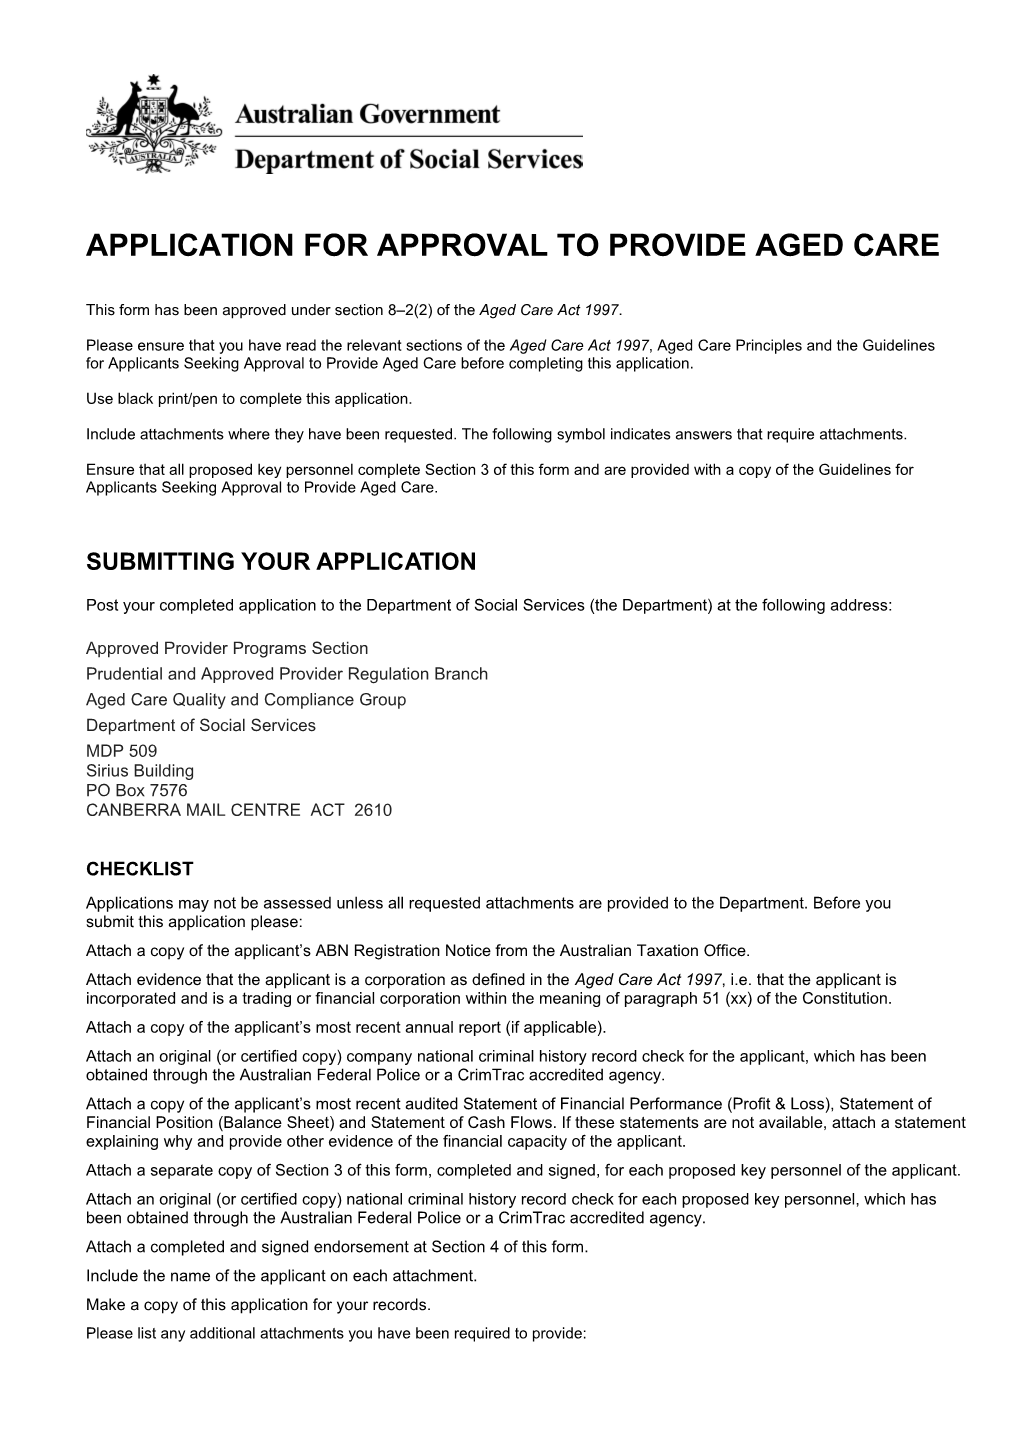 Application for Approval to Provide Aged Care